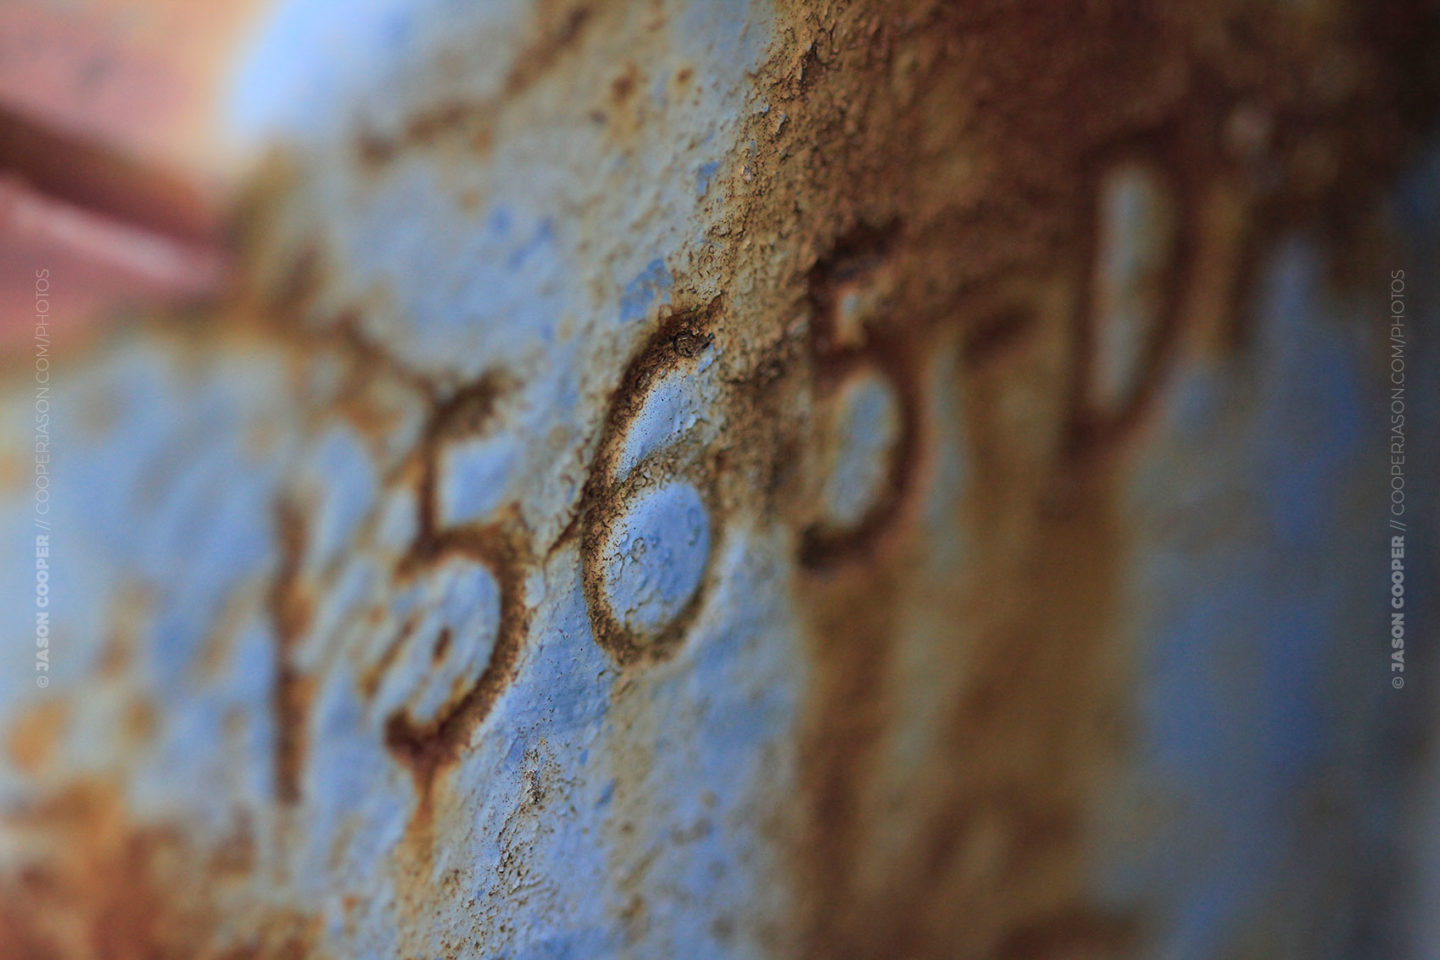 photo of numbers stamped in metal from an old tractor